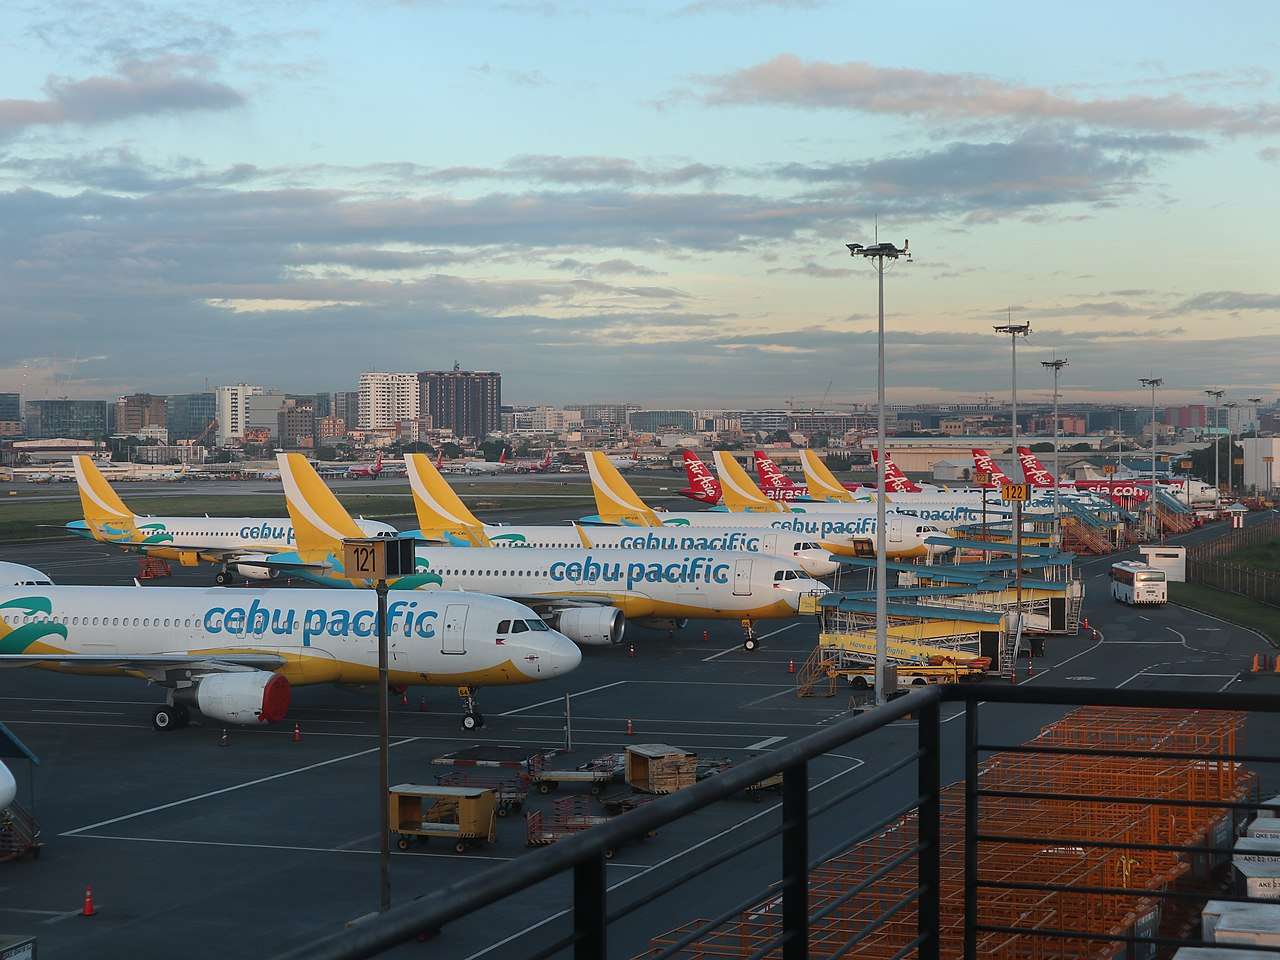 Cebu Pacific and Air Asia planes parked at Ninoy Aquino airport in the Philippines.